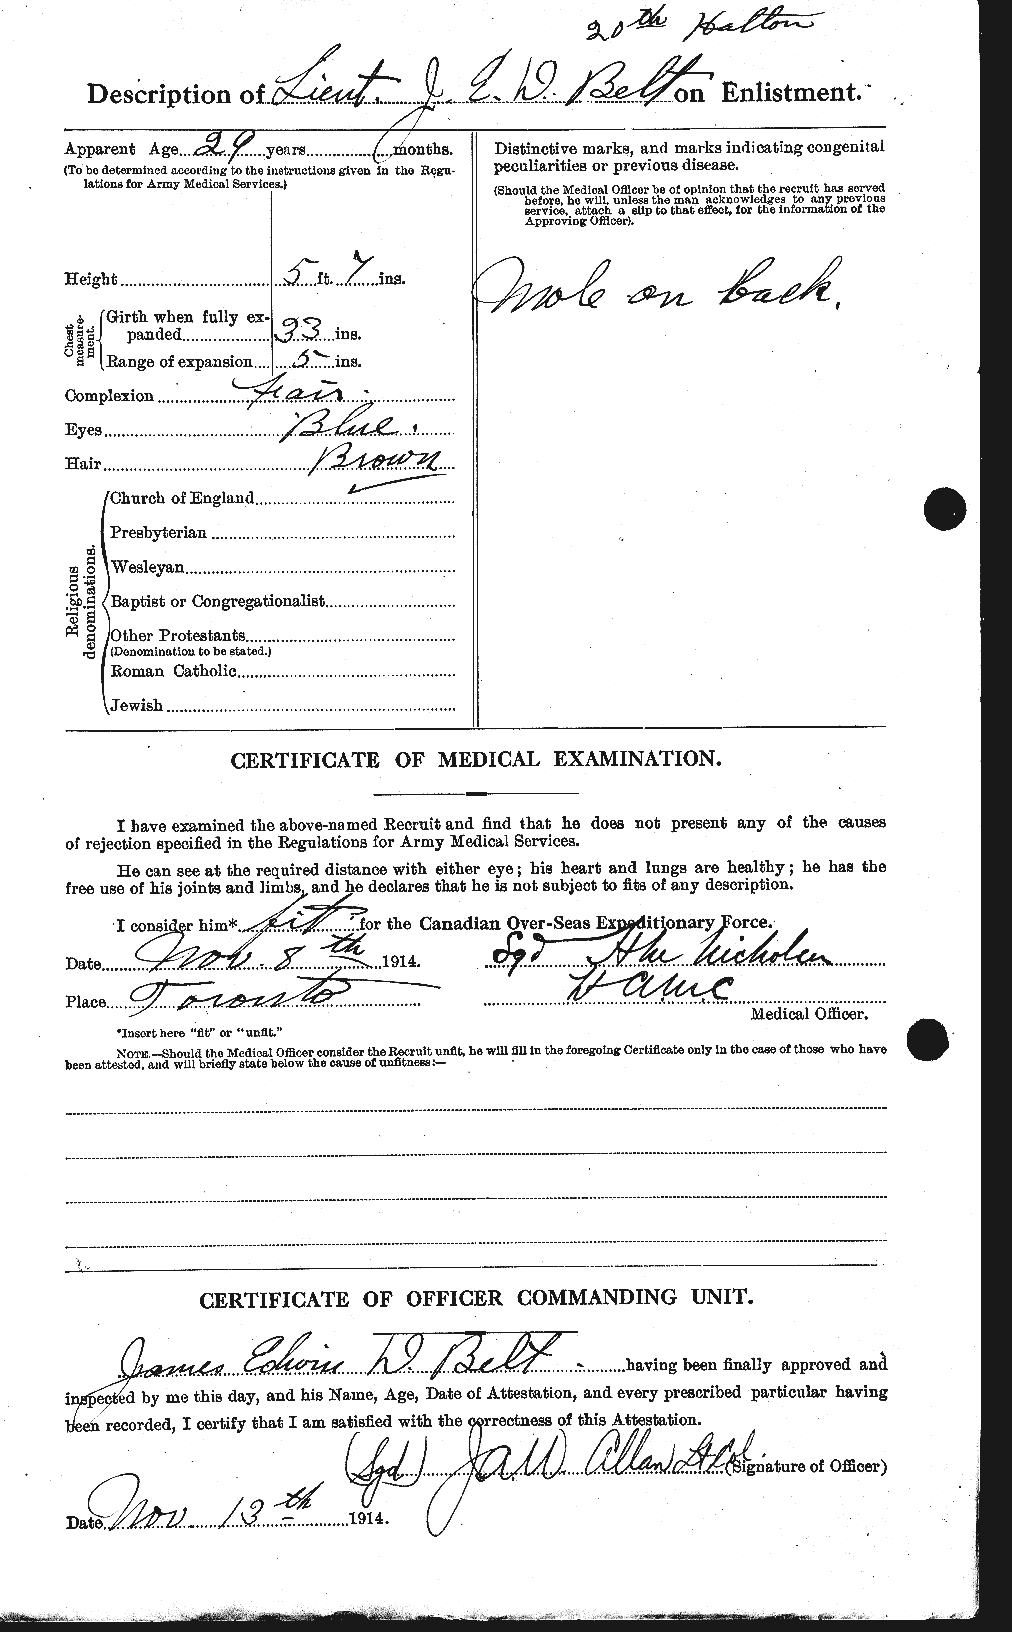 Personnel Records of the First World War - CEF 233642b